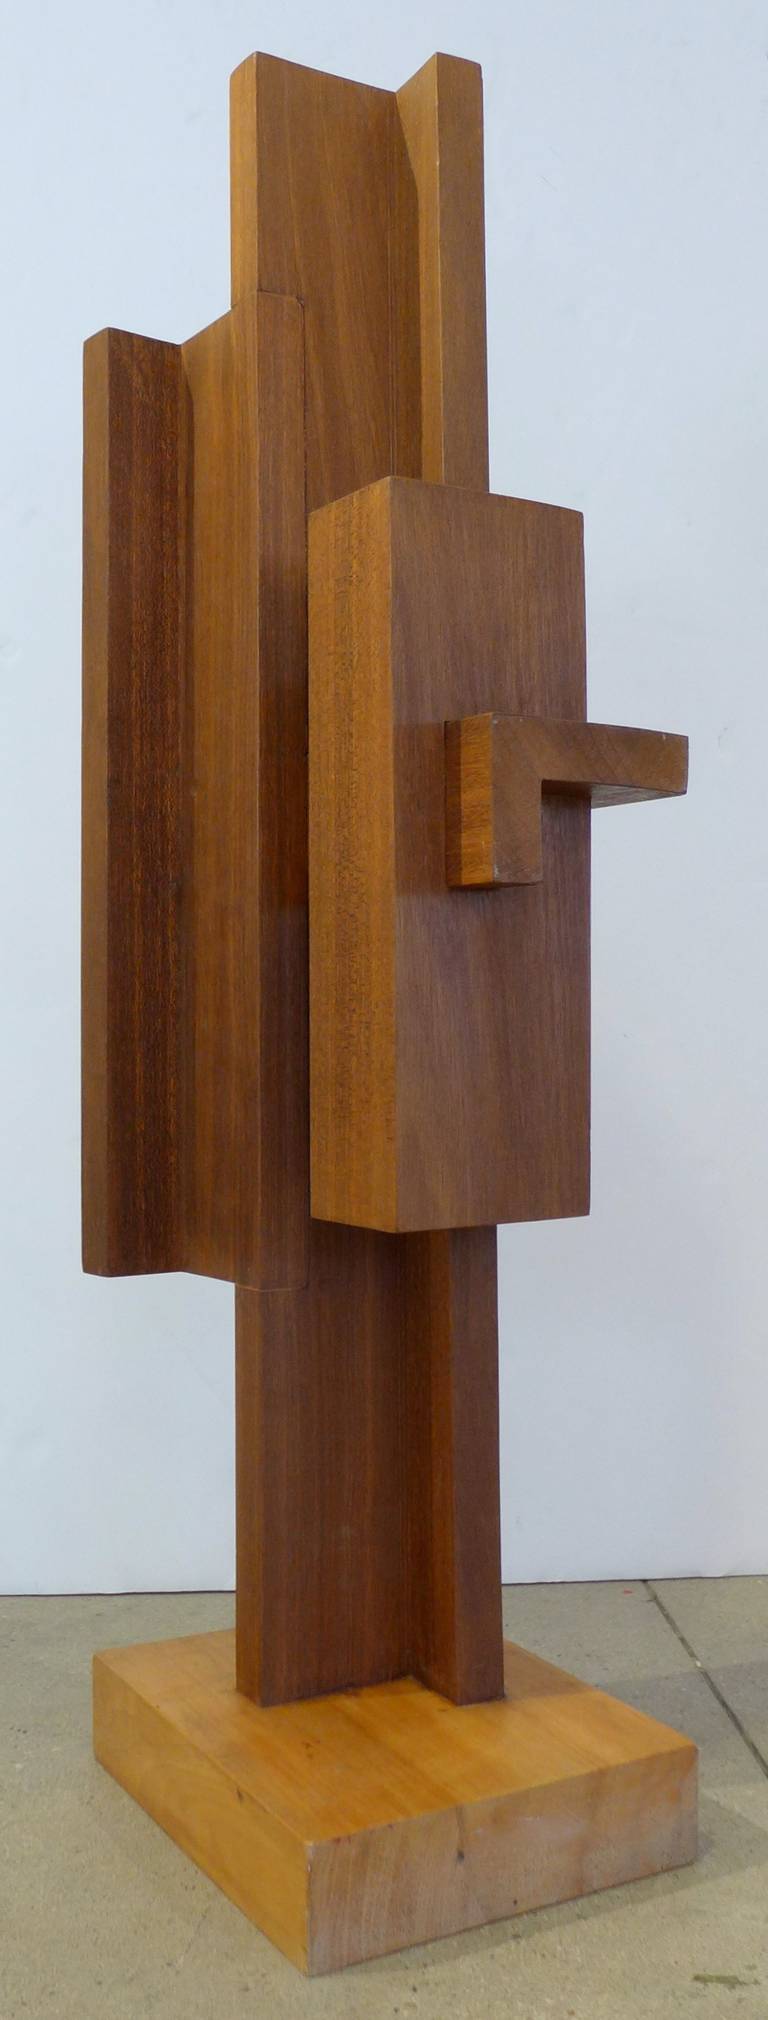 Constructivist sculpture of intersecting planes of wood by Dutch artist Johannes Hoog, dated 1982. A powerful and impressive work that references De Stijl architecture, tribal art, Brancusi, and Alexander Noll. The sculpture, which looks strikingly